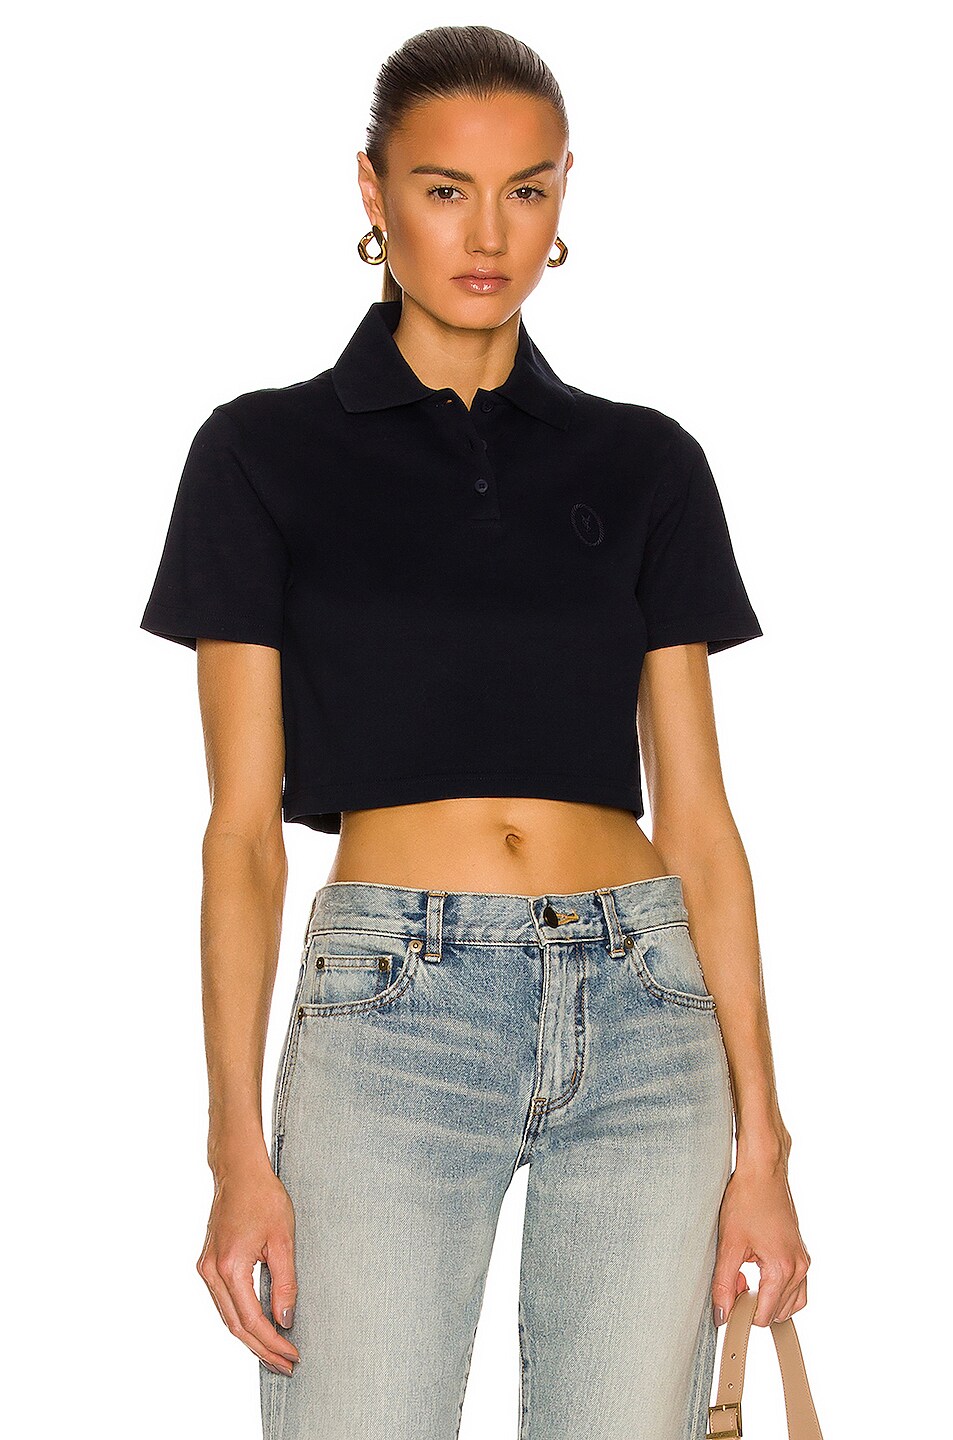 Saint Laurent Cropped Polo Top in Marine | FWRD